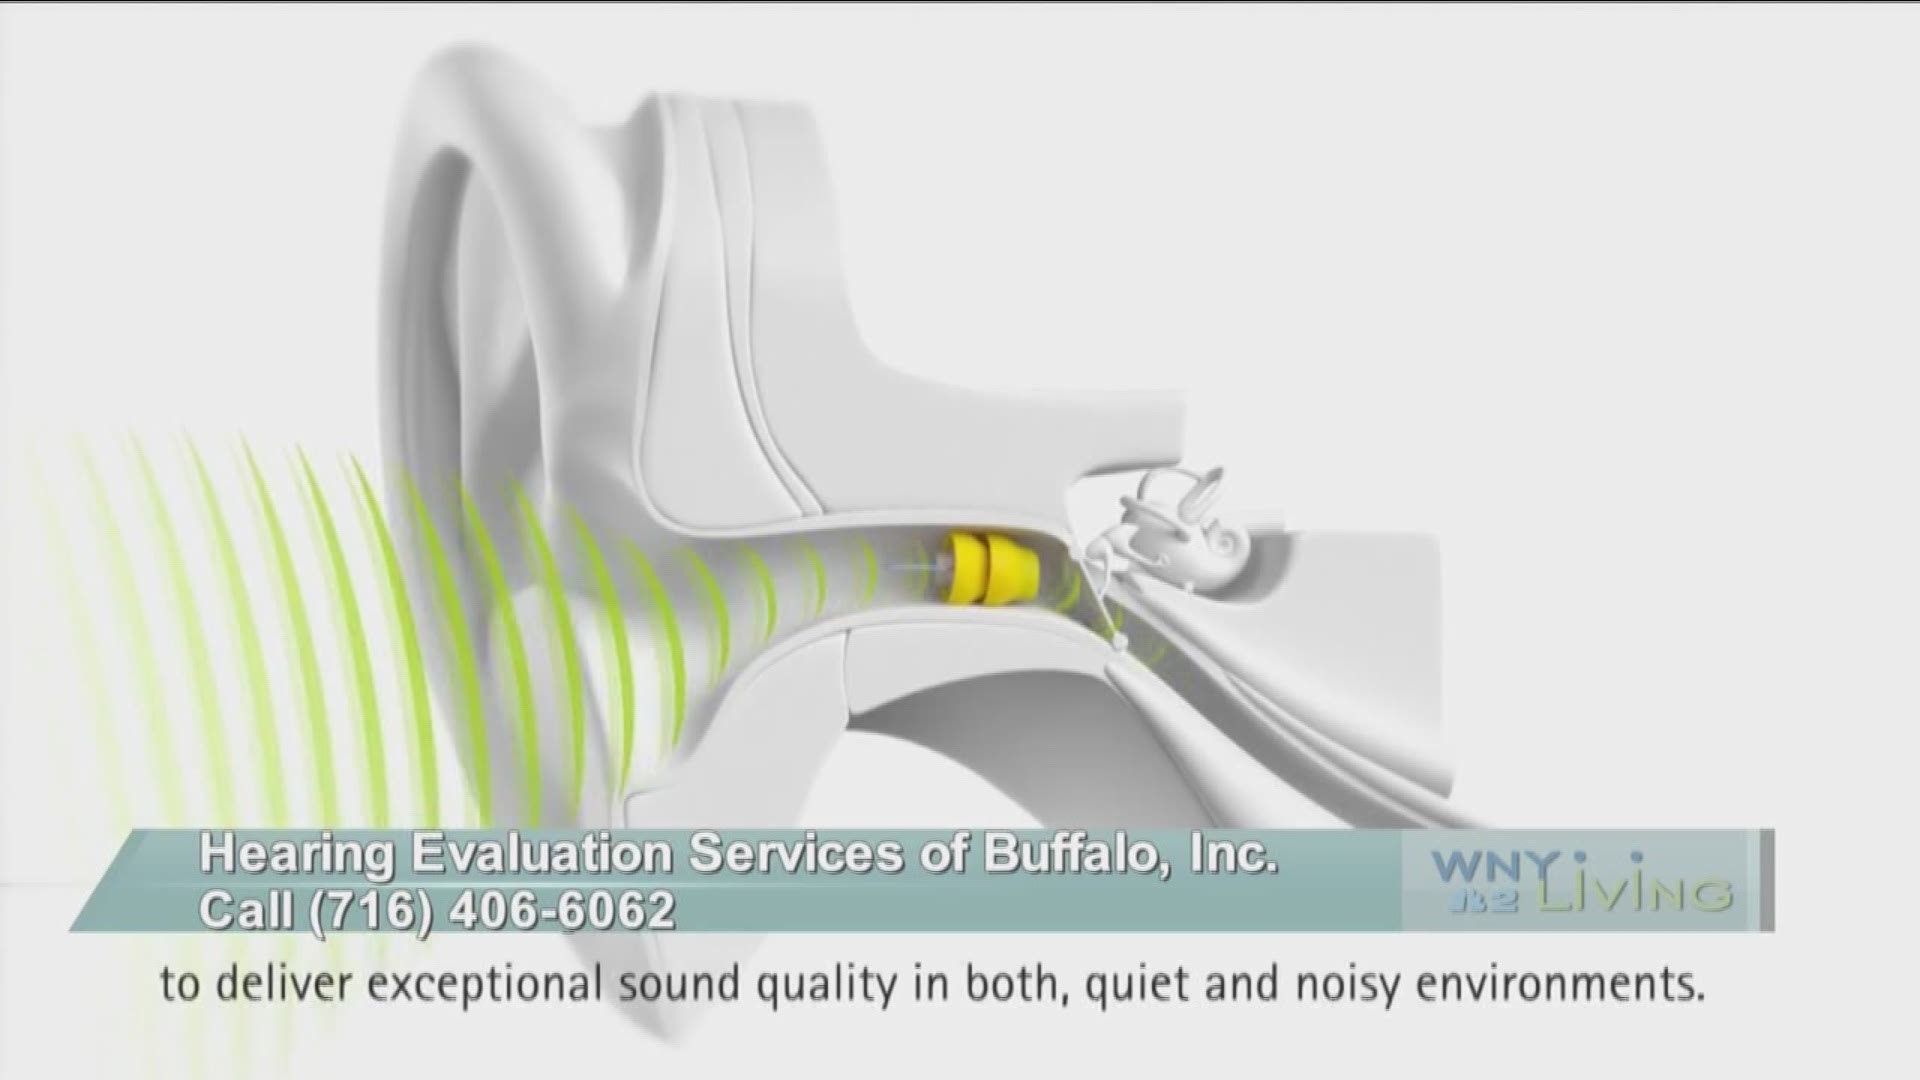 WNY Living - April 14 - Hearing Evaluation Services of Buffalo